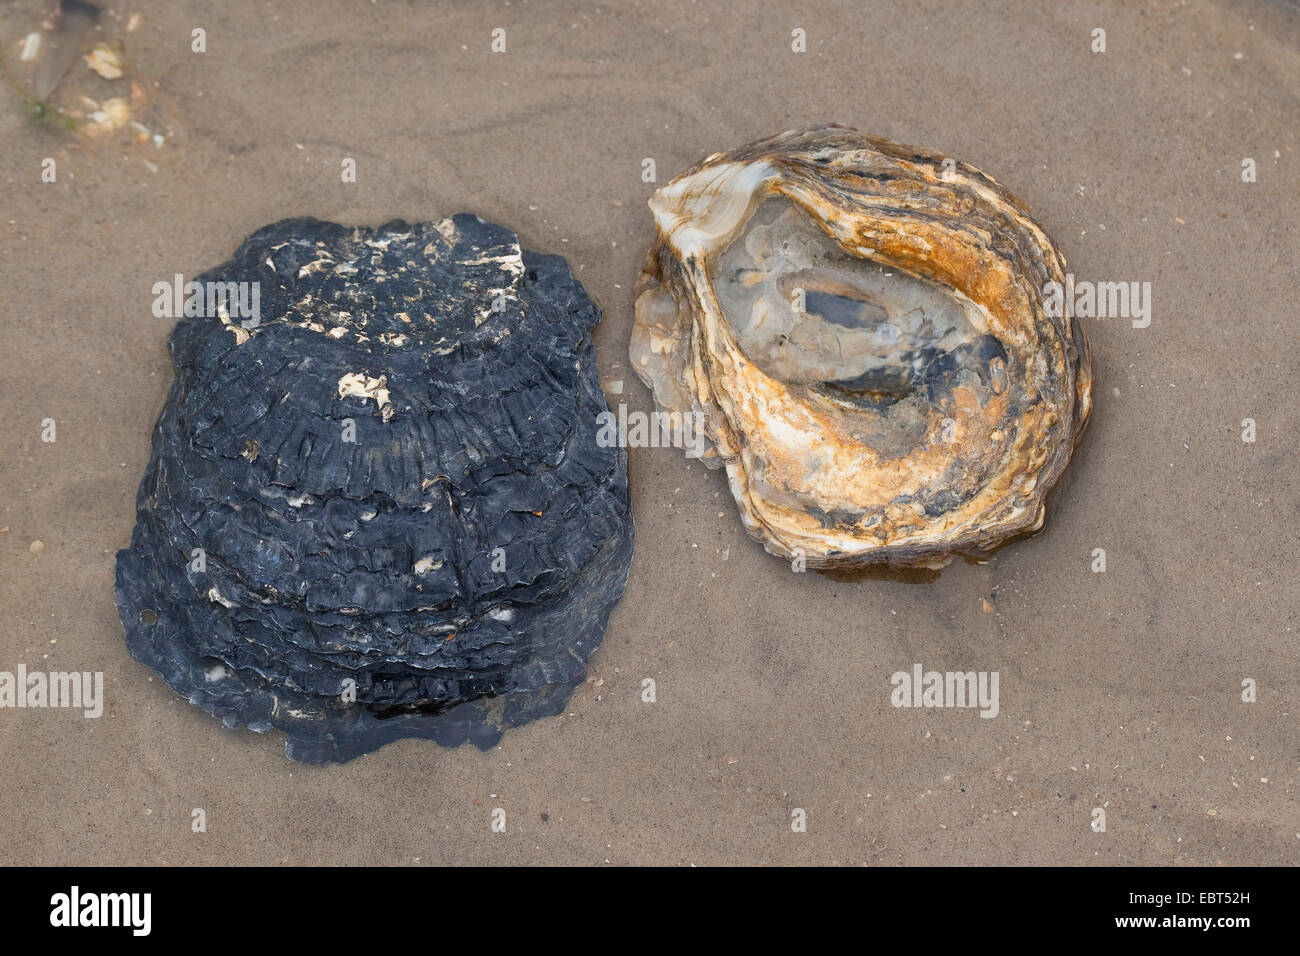 European flat oyster, Colchester native oyster, mud oyster, edible oyster (Ostrea edulis), shells on the beach, Germany Stock Photo